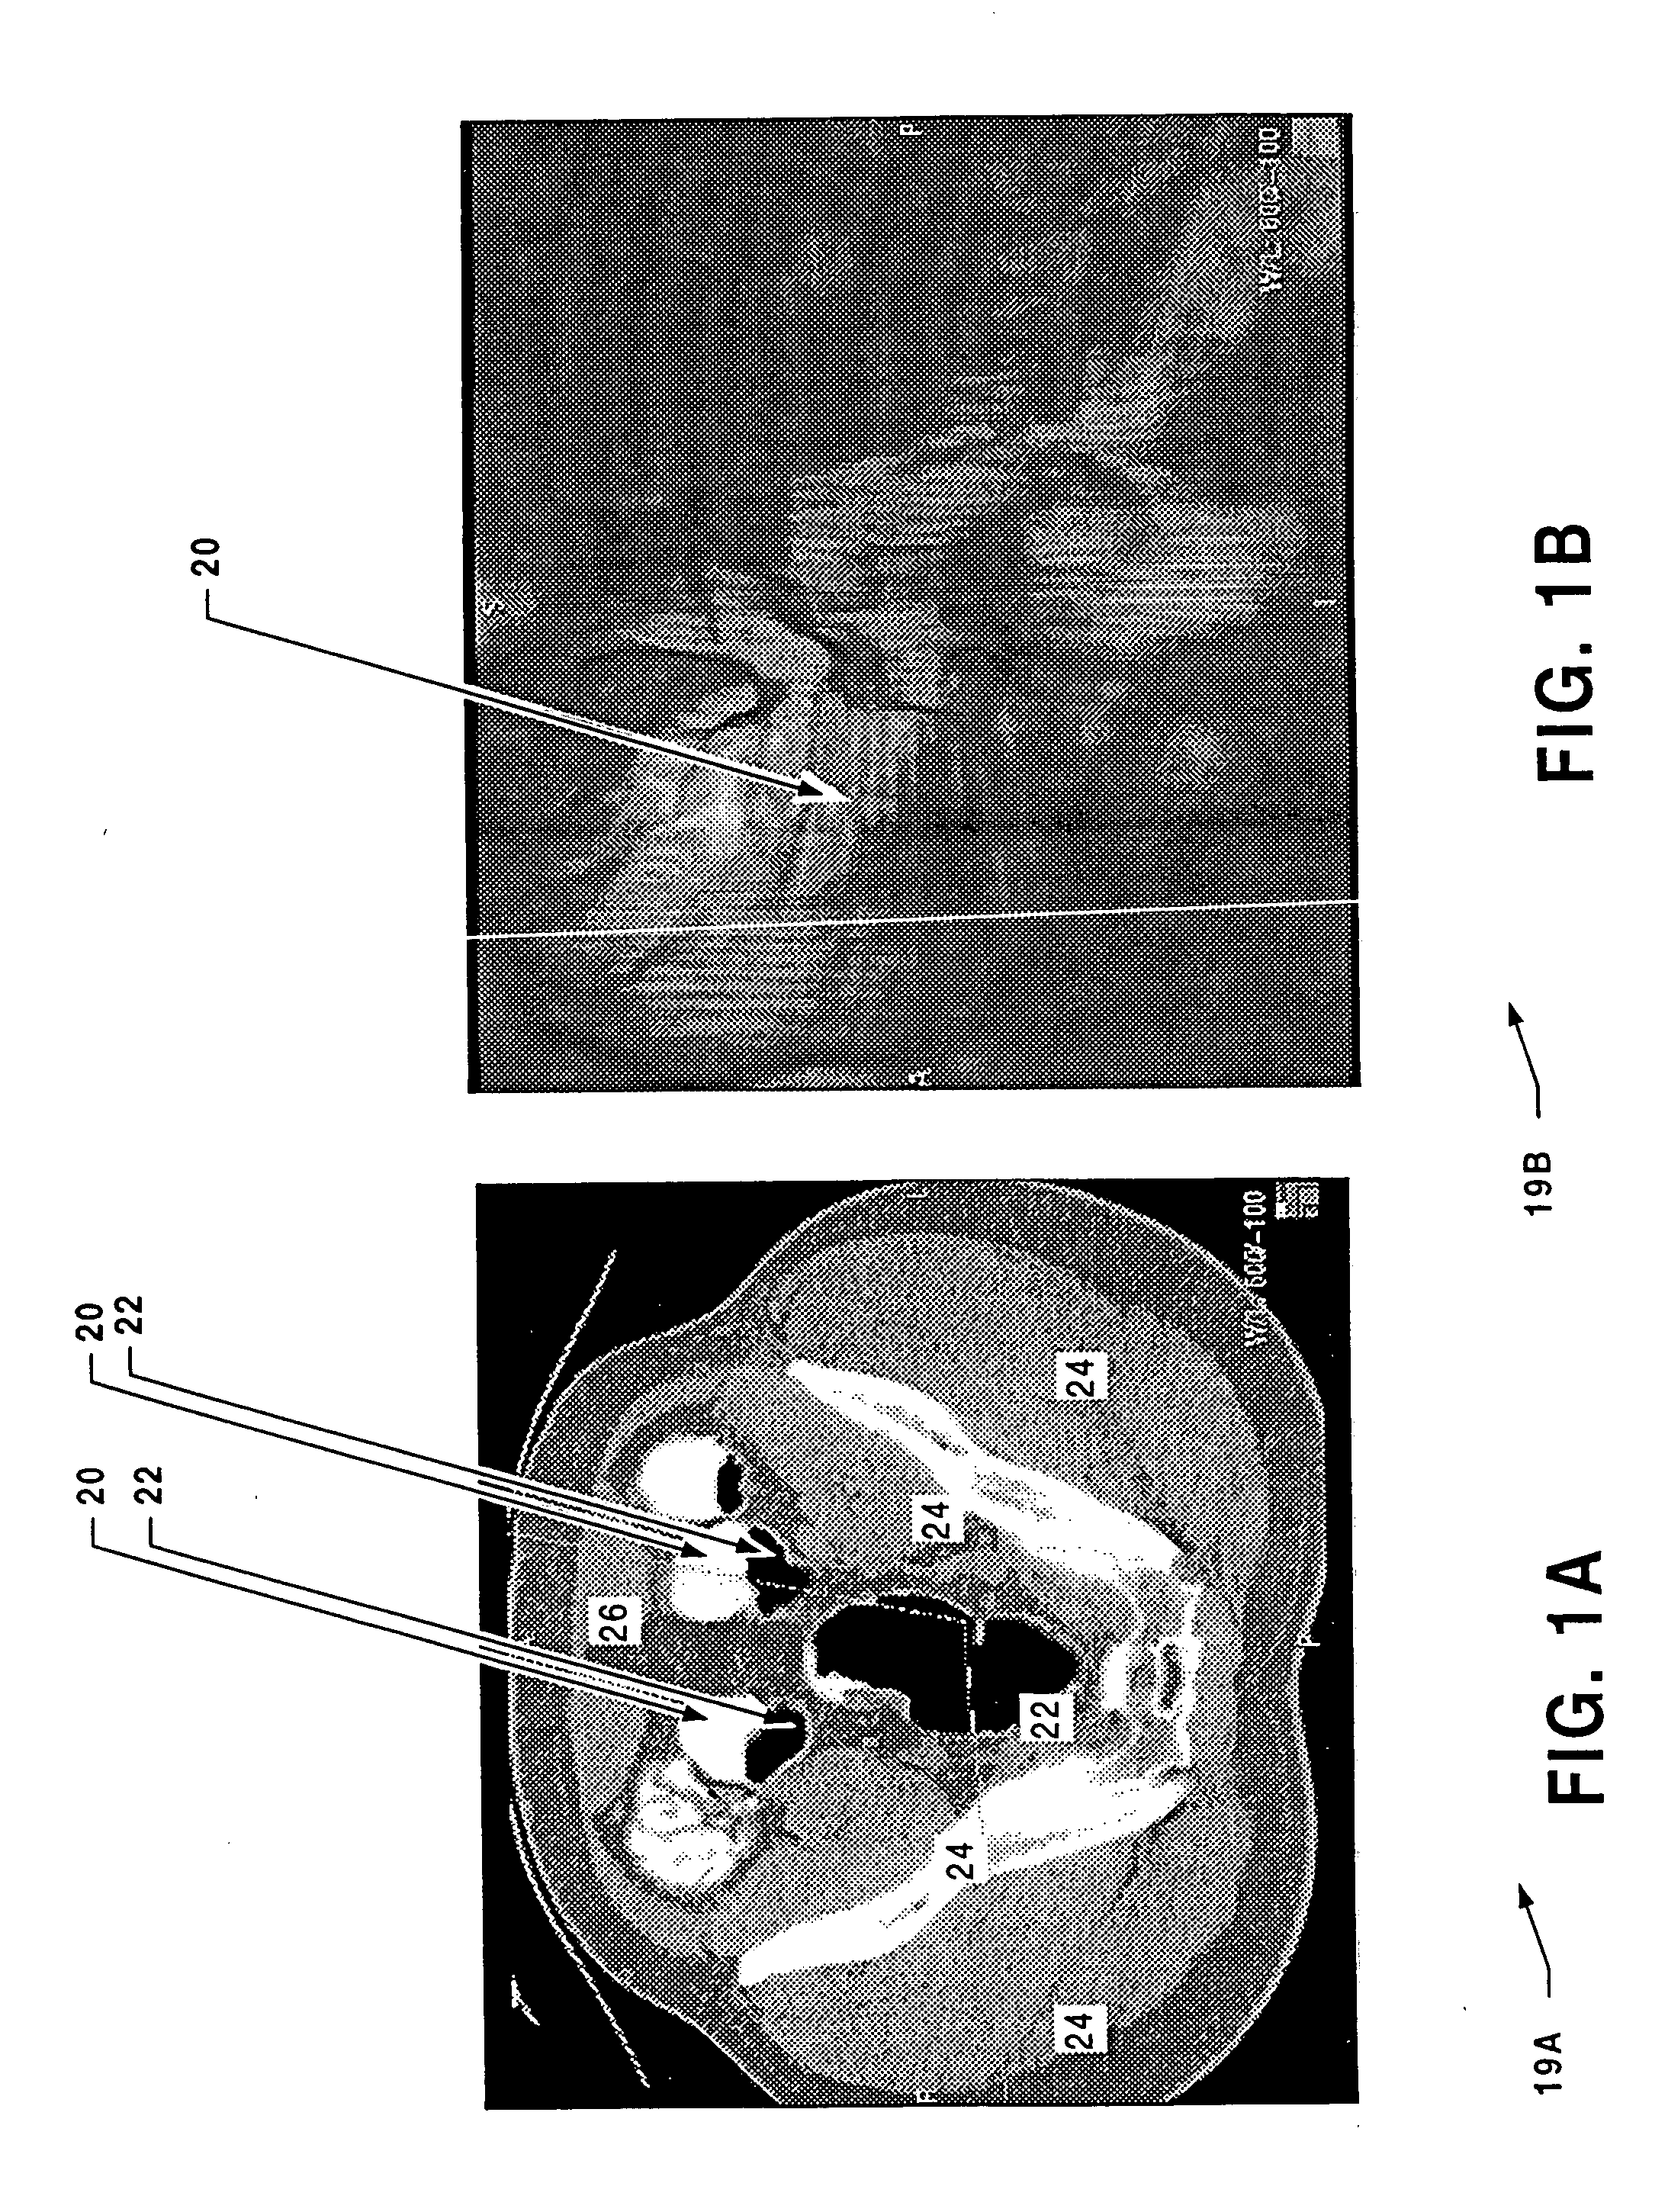 Methods for digital bowel subtraction and polyp detection